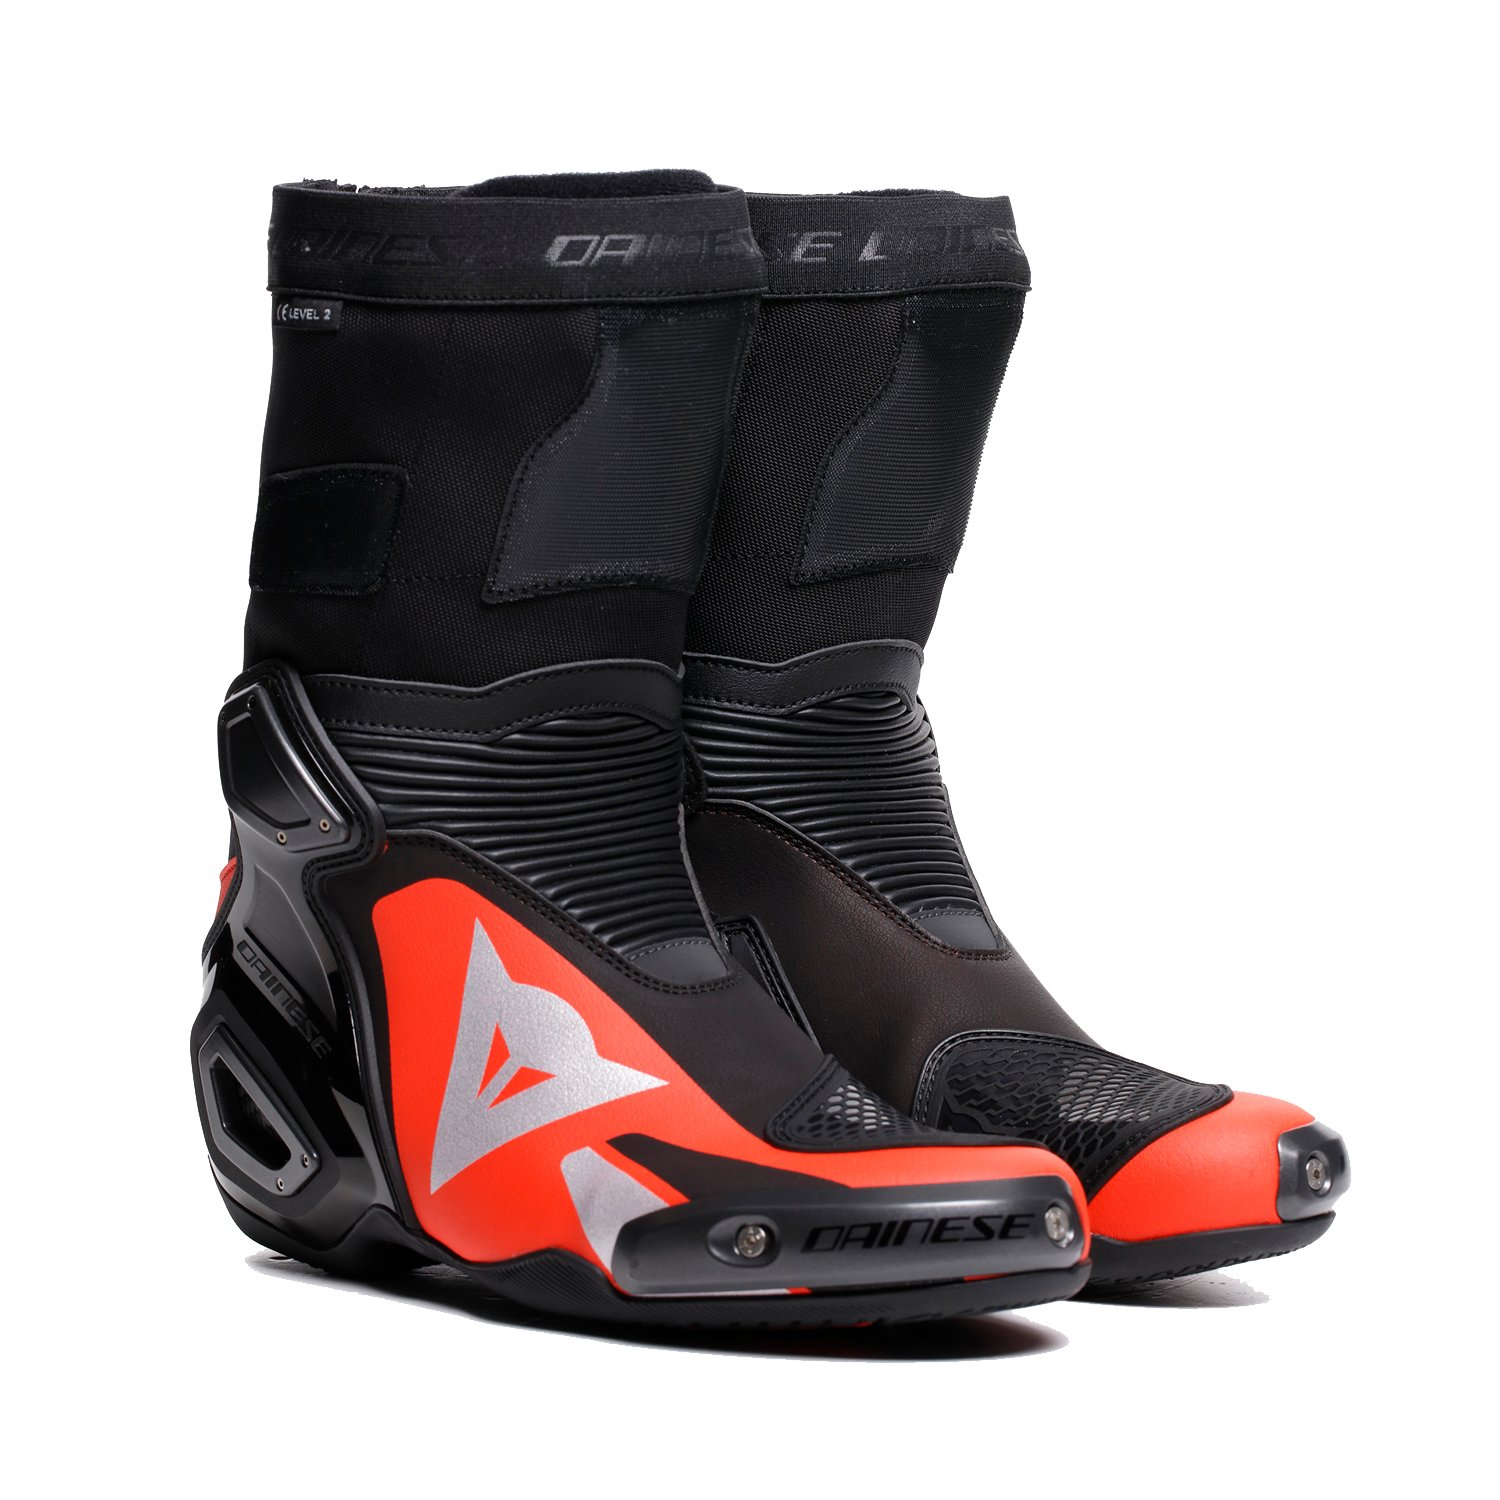 Image of EU Dainese Axial 2 Boots Black Red Fluo Taille 42